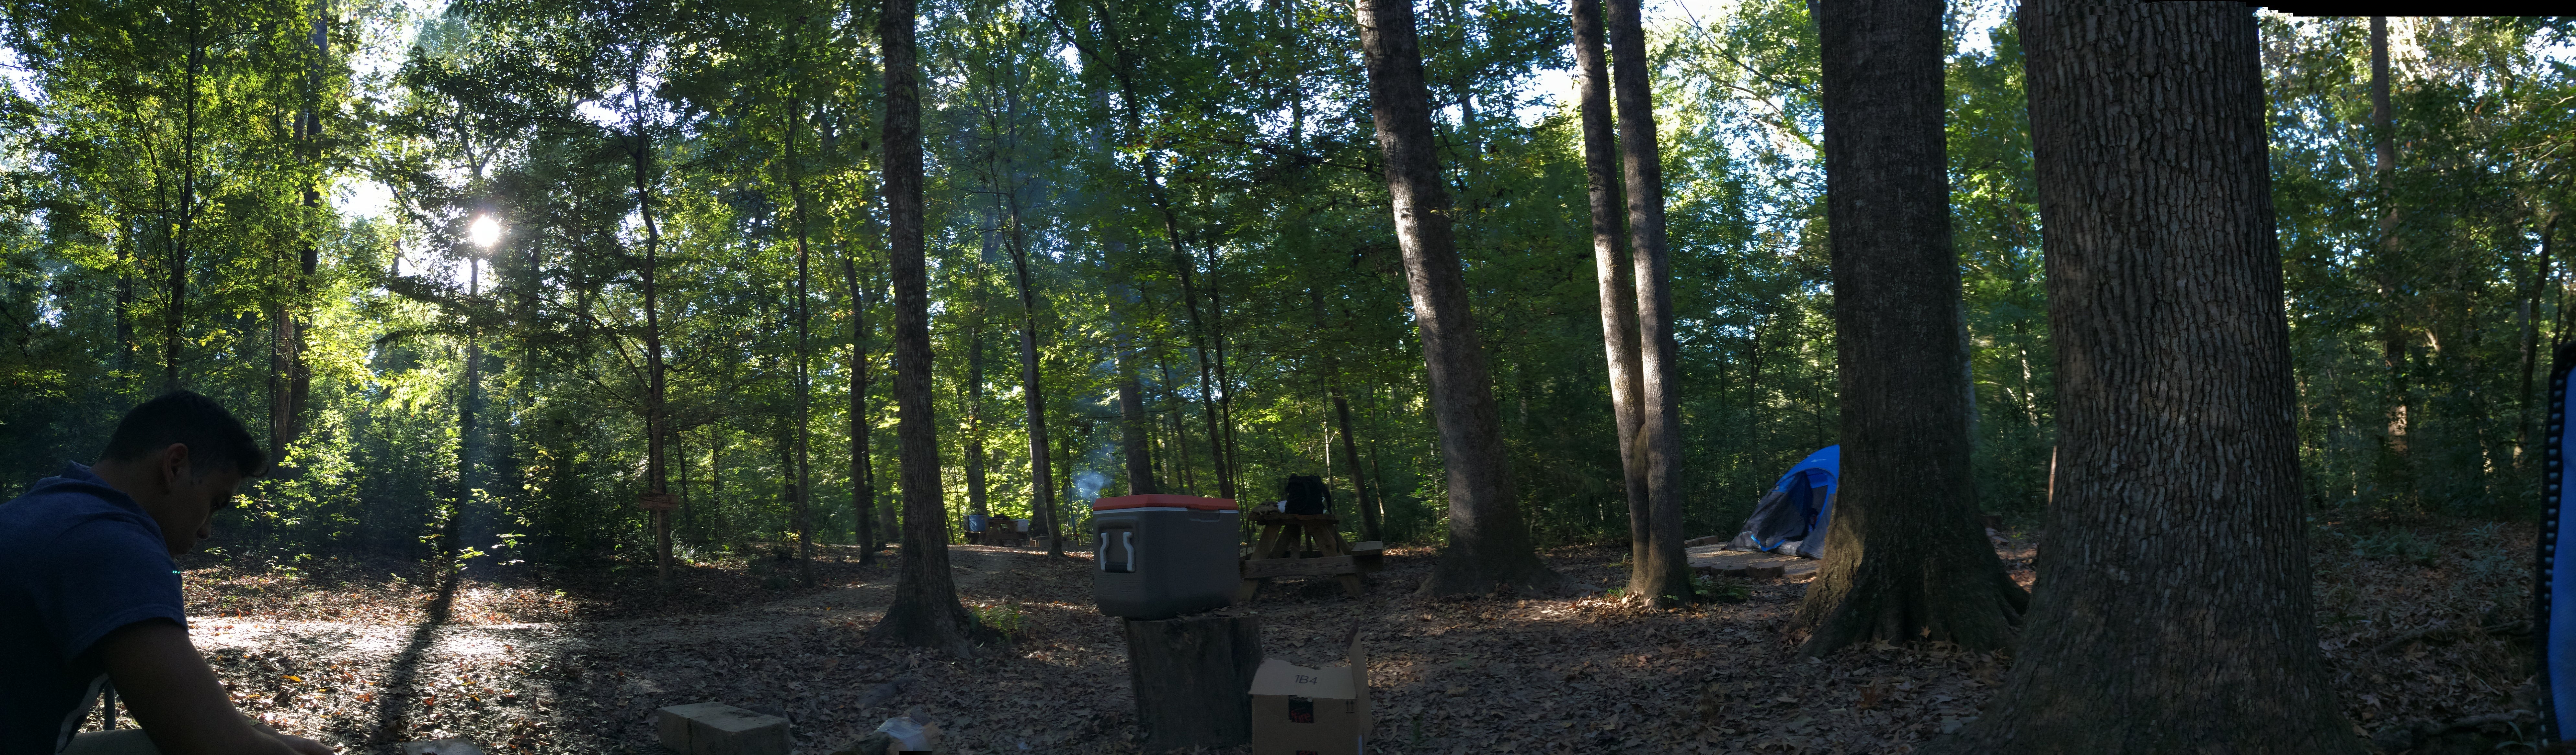 Camper submitted image from Tunica Hills Campground - 2